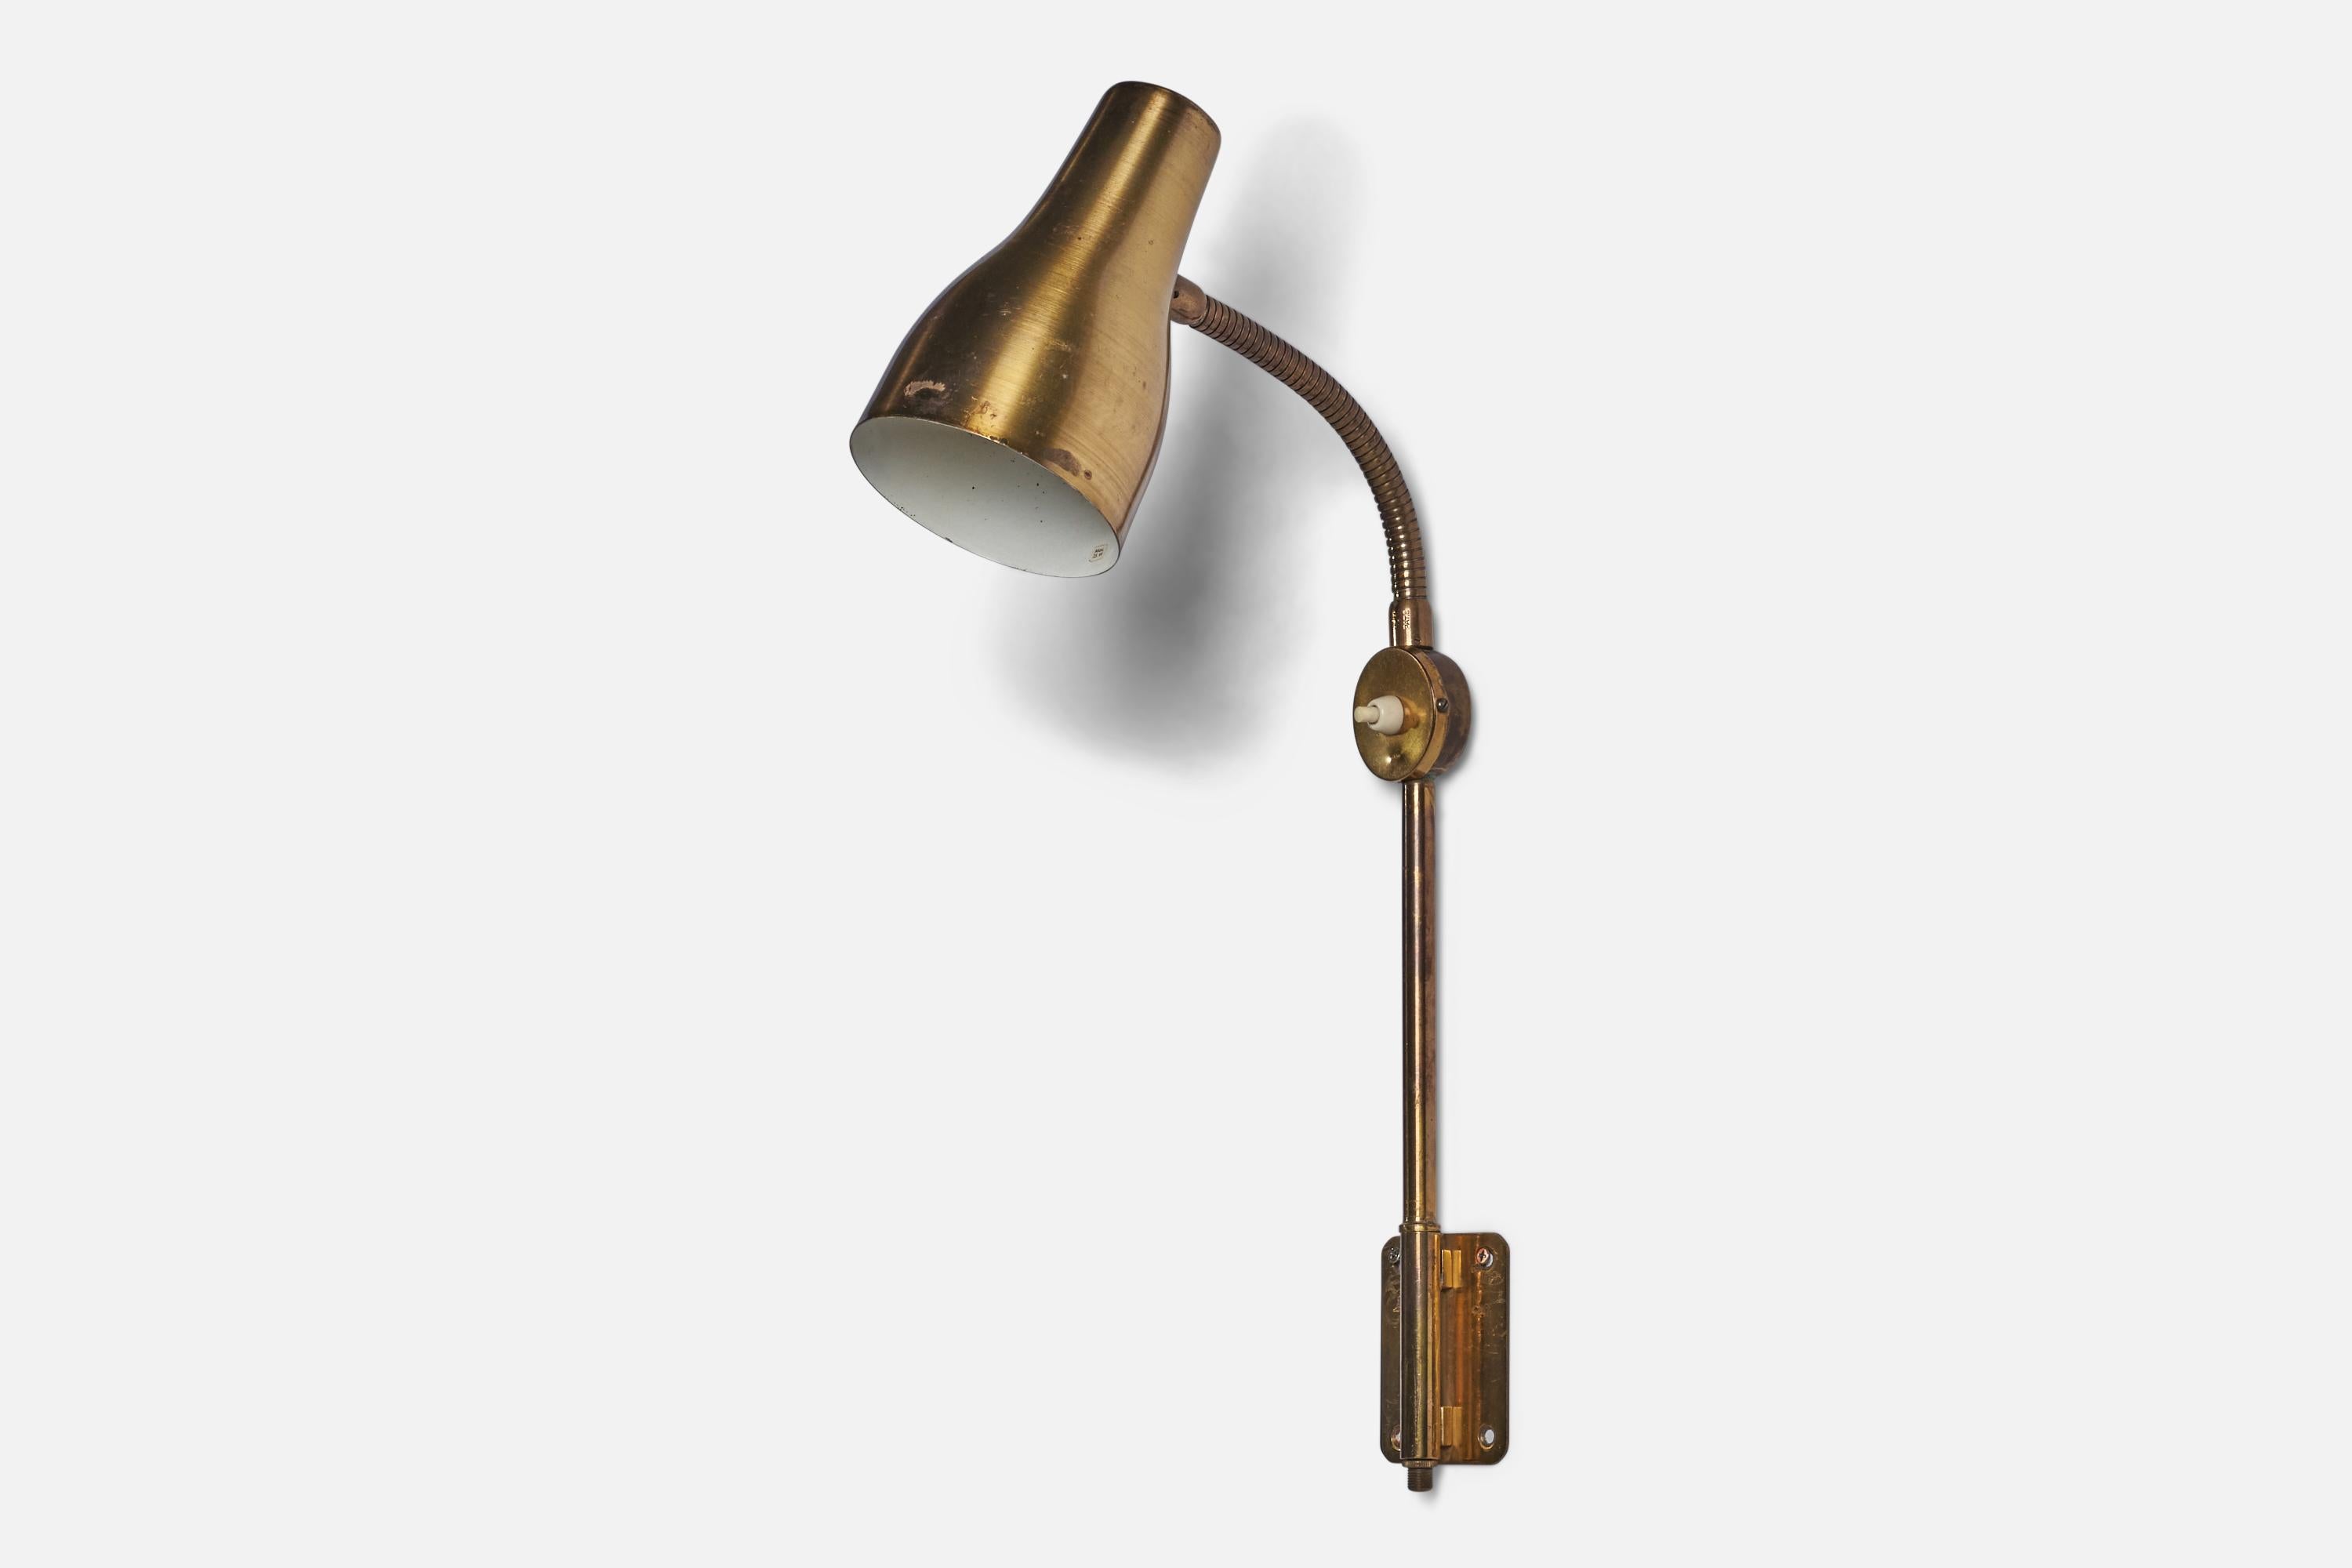 An adjustable brass wall light designed and produced in Sweden, 1940s.

Overall Dimensions (inches): 23.5” H x 6.75” W x 7” D
Back Plate Dimensions (inches): 3.3” H x 2.6” W
Bulb Specifications: E-26 Bulb
Number of Sockets: 1
All lighting will be